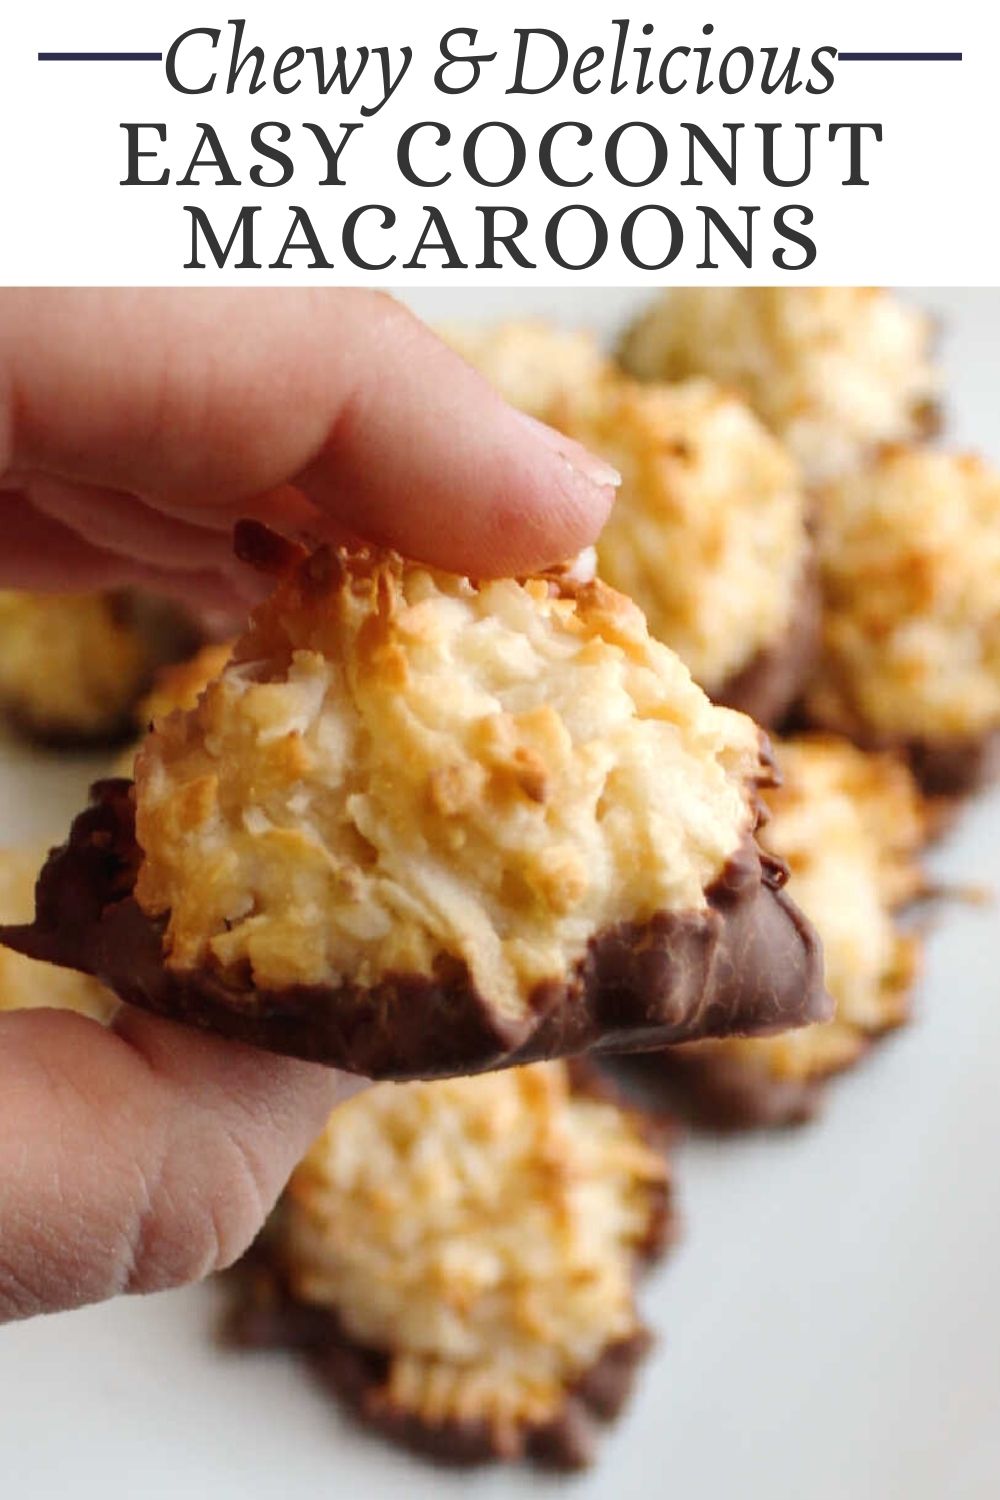 These easy coconut macaroon cookies are a perfect way to quench your coconut cravings. This simple recipe makes a chewy cookie with delicious flavor. Bake them up as a quick addition to your holiday cookies or make them for an easy just because treat.